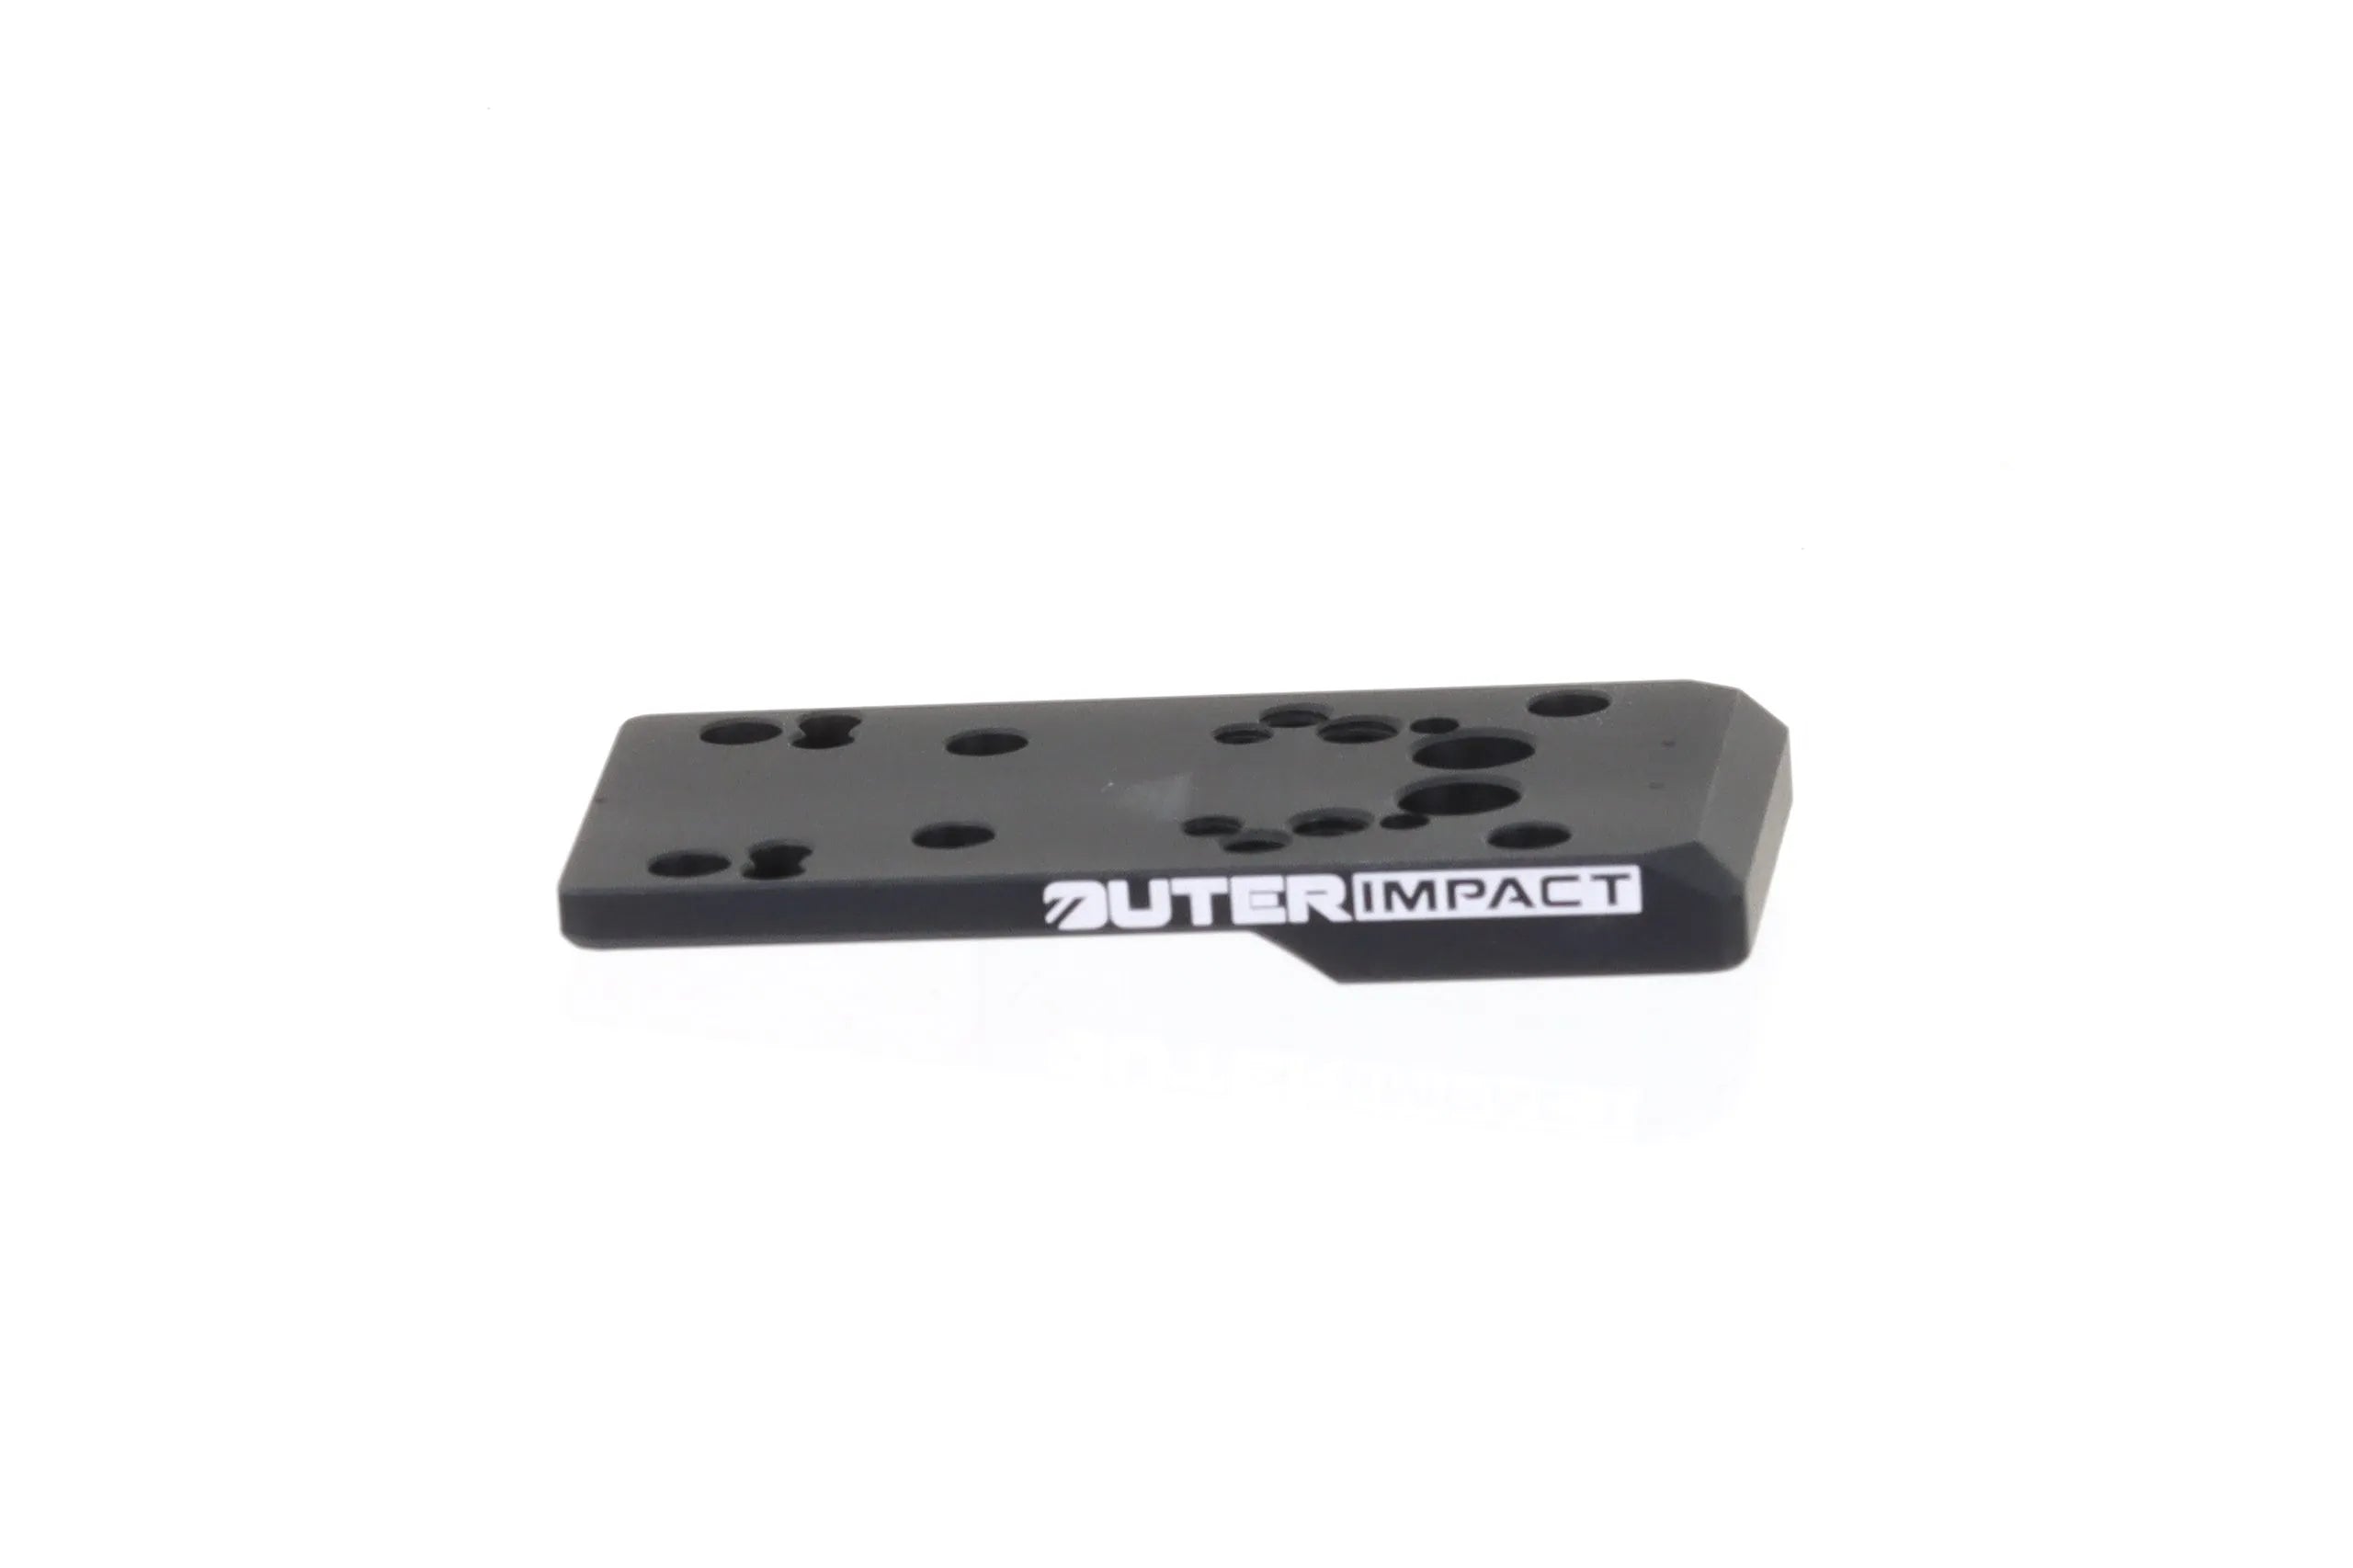 CZ P-09 Pistol Red Dot Adapter Mount Plate - OuterImpact